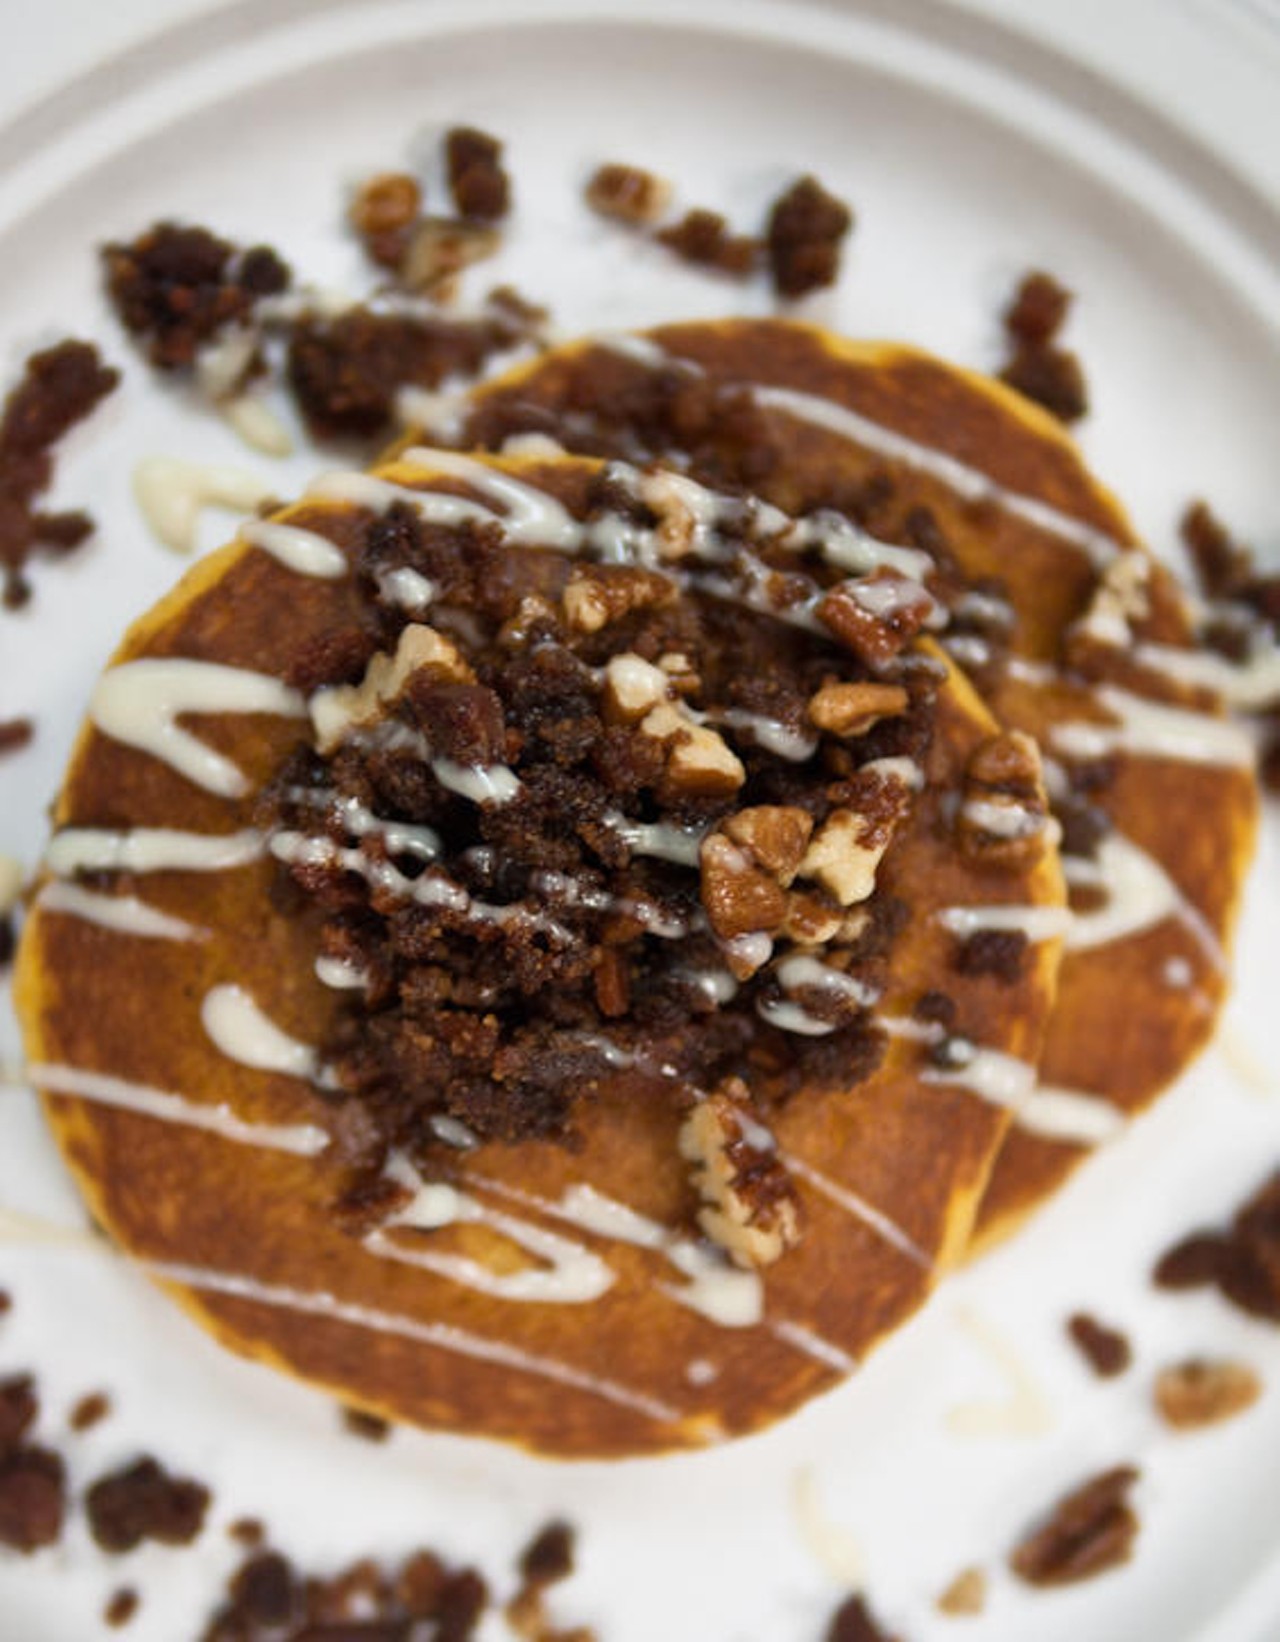 Spicy, sweet, and savory sweet potato pancakes topped with praline and bacon crumble and Kentucky bourbon whiskey sauce served up by Perk Eatery in Scottsdale, Arizona.